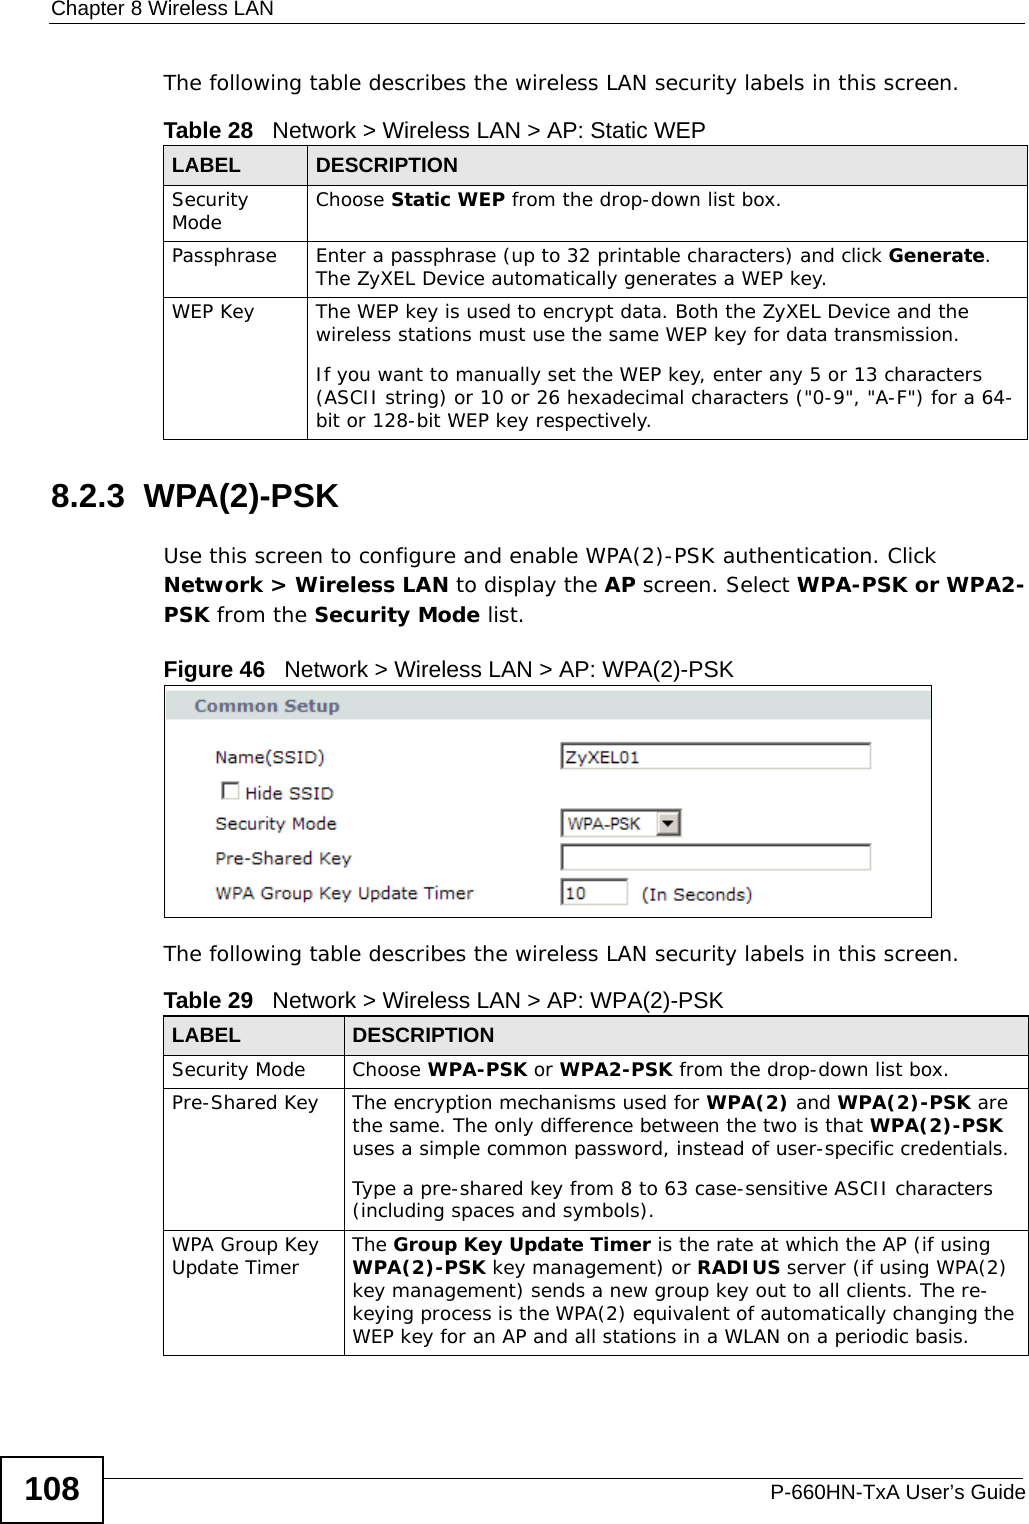 Chapter 8 Wireless LANP-660HN-TxA User’s Guide108The following table describes the wireless LAN security labels in this screen.8.2.3  WPA(2)-PSKUse this screen to configure and enable WPA(2)-PSK authentication. Click Network &gt; Wireless LAN to display the AP screen. Select WPA-PSK or WPA2-PSK from the Security Mode list.Figure 46   Network &gt; Wireless LAN &gt; AP: WPA(2)-PSKThe following table describes the wireless LAN security labels in this screen.Table 28   Network &gt; Wireless LAN &gt; AP: Static WEPLABEL DESCRIPTIONSecurity Mode Choose Static WEP from the drop-down list box.Passphrase Enter a passphrase (up to 32 printable characters) and click Generate. The ZyXEL Device automatically generates a WEP key.WEP Key The WEP key is used to encrypt data. Both the ZyXEL Device and the wireless stations must use the same WEP key for data transmission.If you want to manually set the WEP key, enter any 5 or 13 characters (ASCII string) or 10 or 26 hexadecimal characters (&quot;0-9&quot;, &quot;A-F&quot;) for a 64-bit or 128-bit WEP key respectively.Table 29   Network &gt; Wireless LAN &gt; AP: WPA(2)-PSKLABEL DESCRIPTIONSecurity Mode Choose WPA-PSK or WPA2-PSK from the drop-down list box.Pre-Shared Key  The encryption mechanisms used for WPA(2) and WPA(2)-PSK are the same. The only difference between the two is that WPA(2)-PSK uses a simple common password, instead of user-specific credentials.Type a pre-shared key from 8 to 63 case-sensitive ASCII characters (including spaces and symbols).WPA Group Key Update Timer The Group Key Update Timer is the rate at which the AP (if using WPA(2)-PSK key management) or RADIUS server (if using WPA(2) key management) sends a new group key out to all clients. The re-keying process is the WPA(2) equivalent of automatically changing the WEP key for an AP and all stations in a WLAN on a periodic basis.